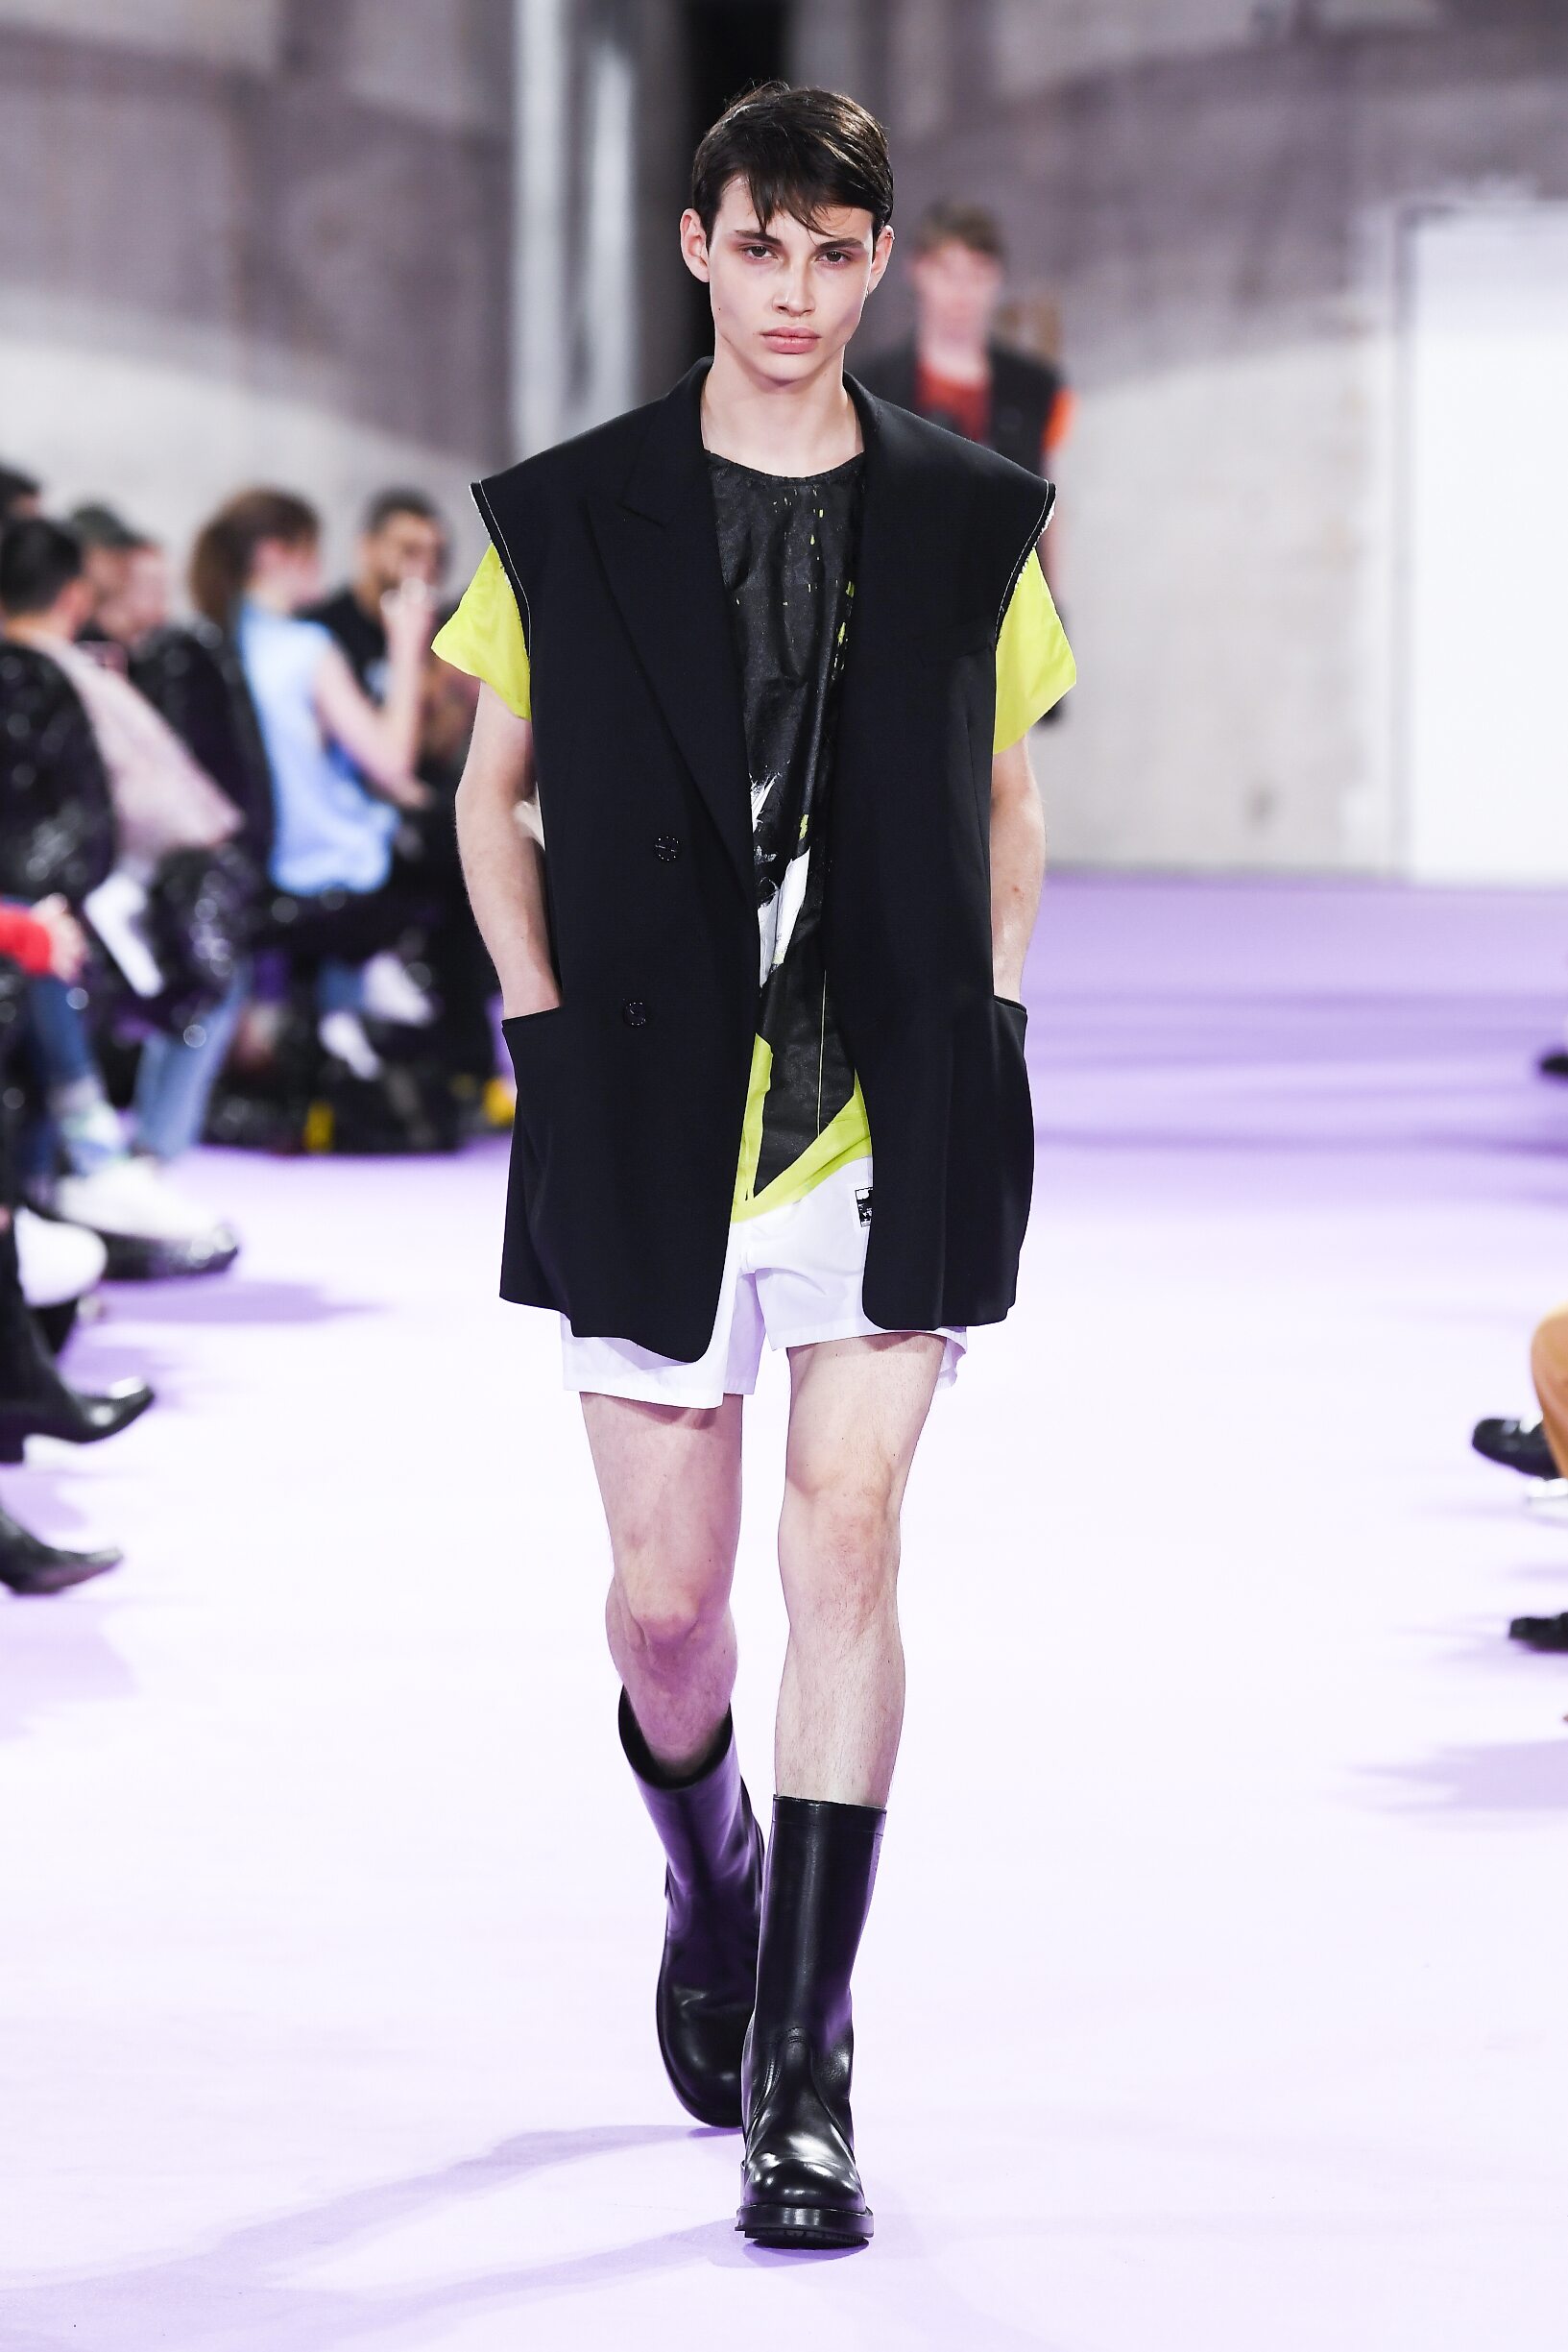 RAF SIMONS SPRING SUMMER 2020 MEN’S COLLECTION | The Skinny Beep